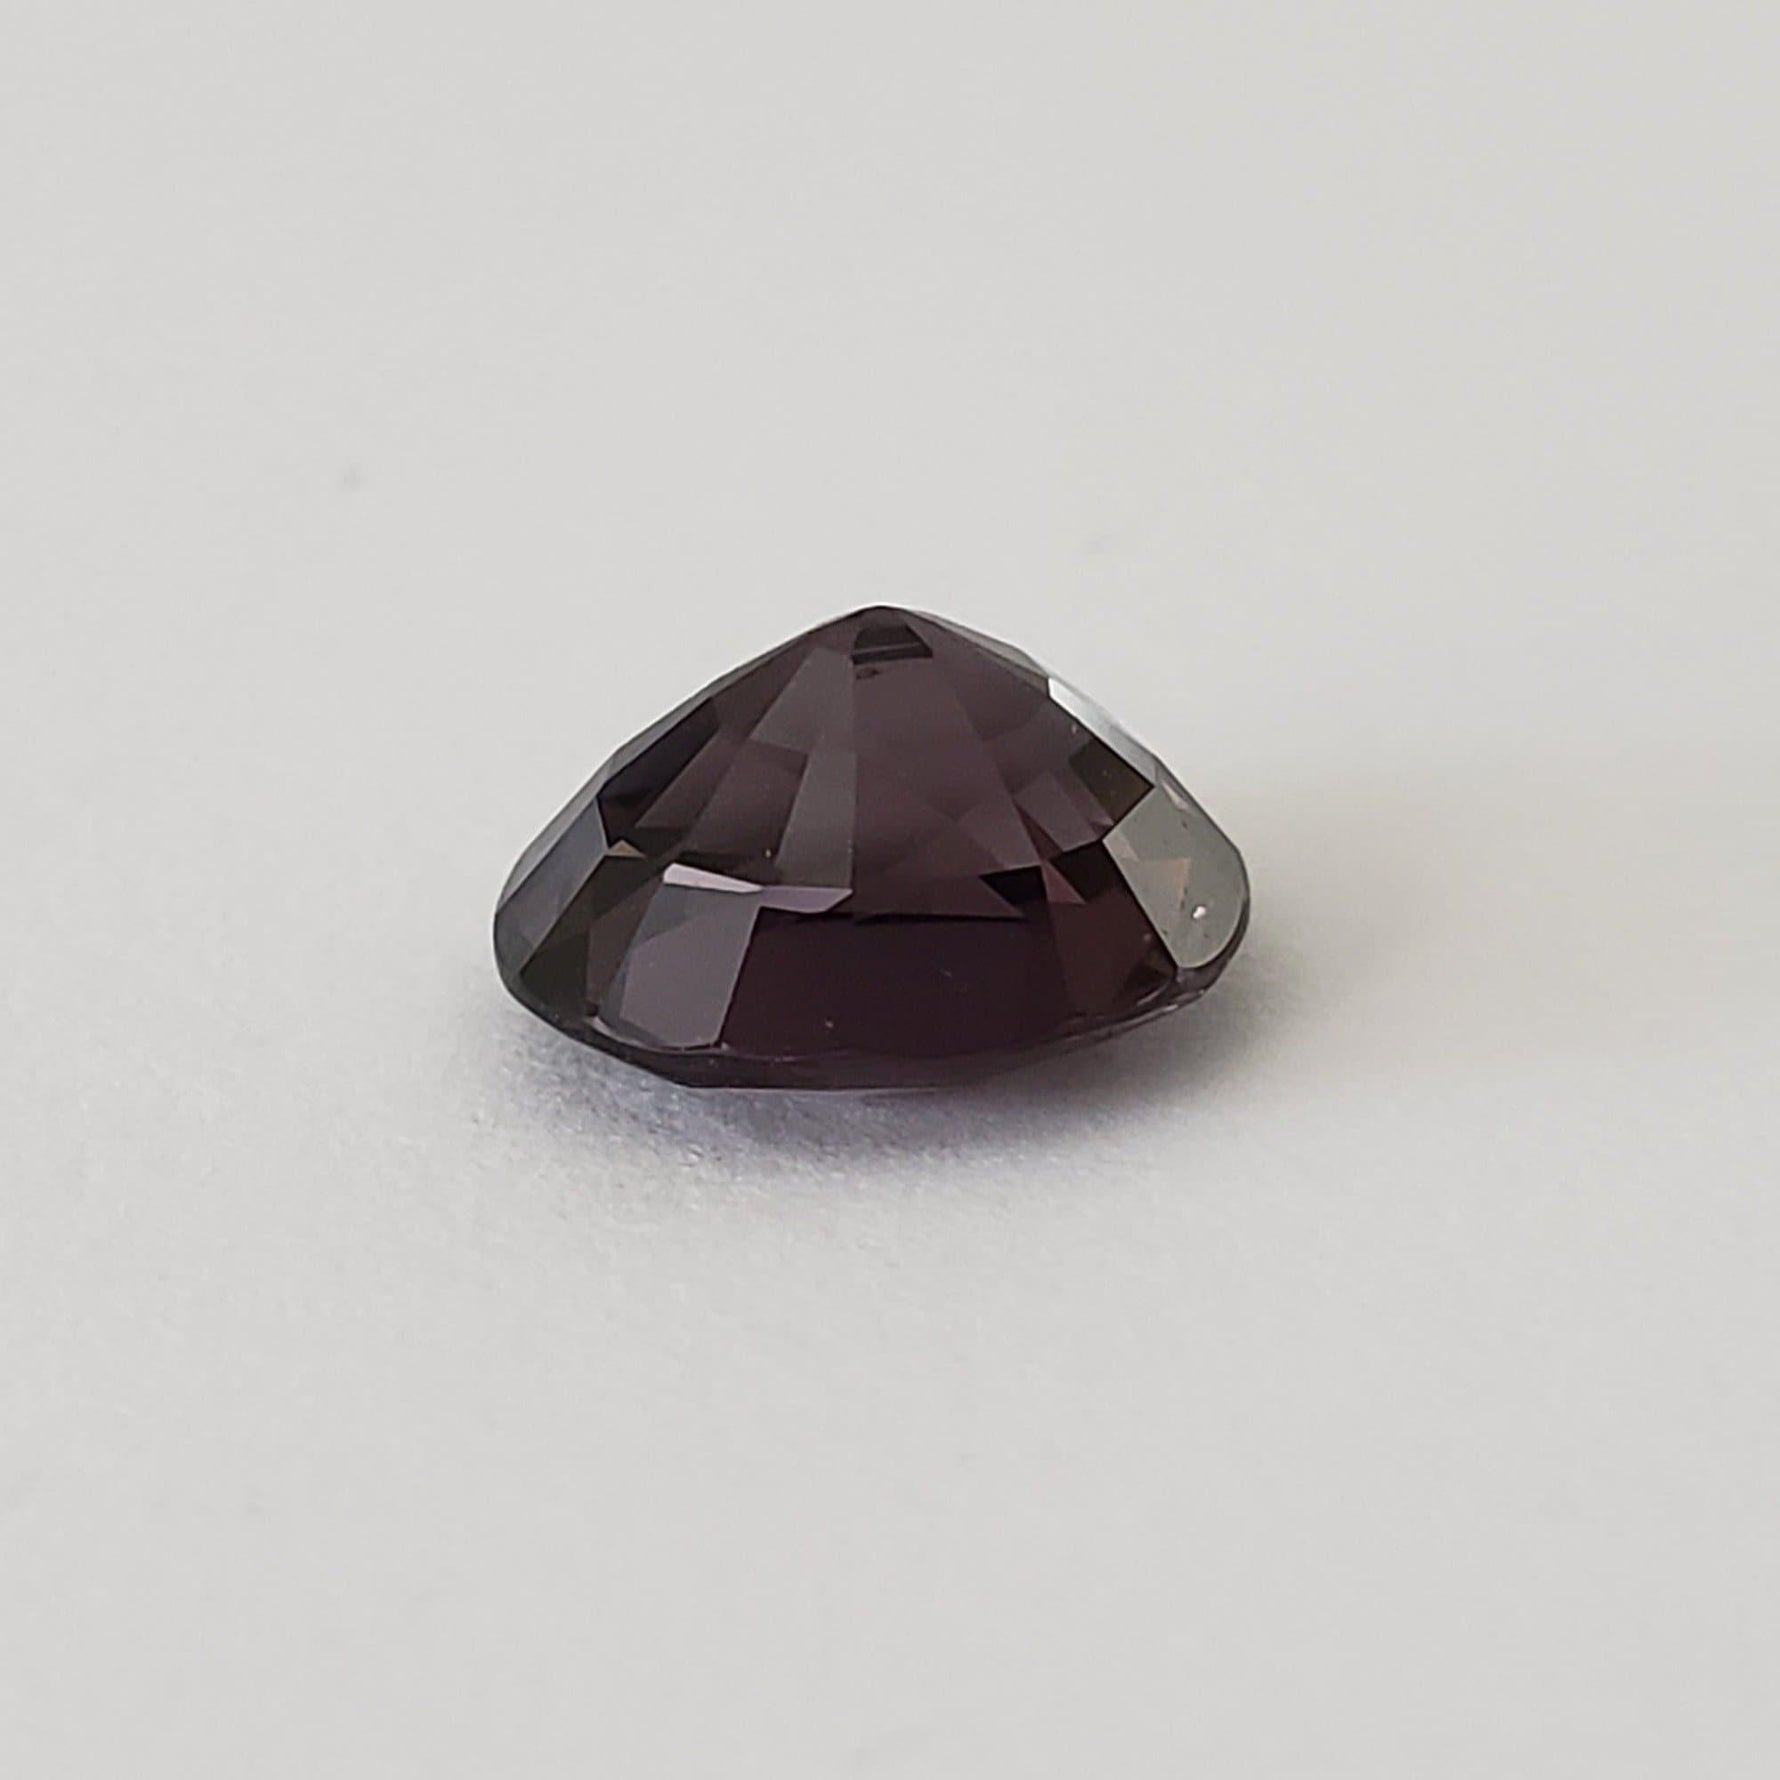 Spinel | Oval Cut | Lavender Pink | Natural | 9.1x7.7mm 2.84ct